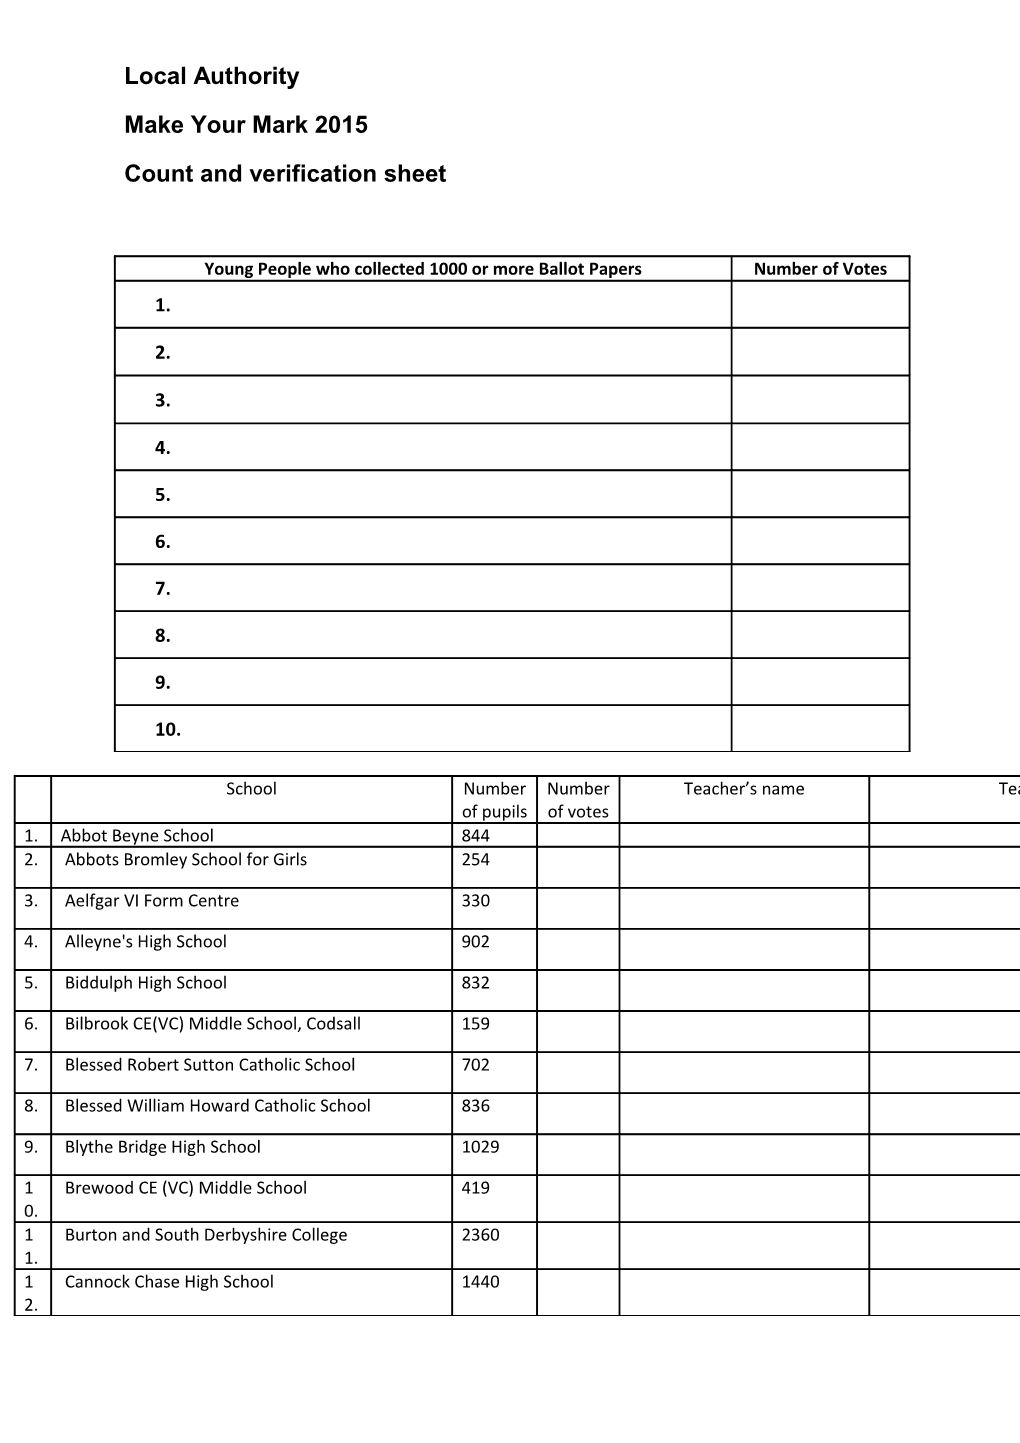 Count and Verification Sheet s1